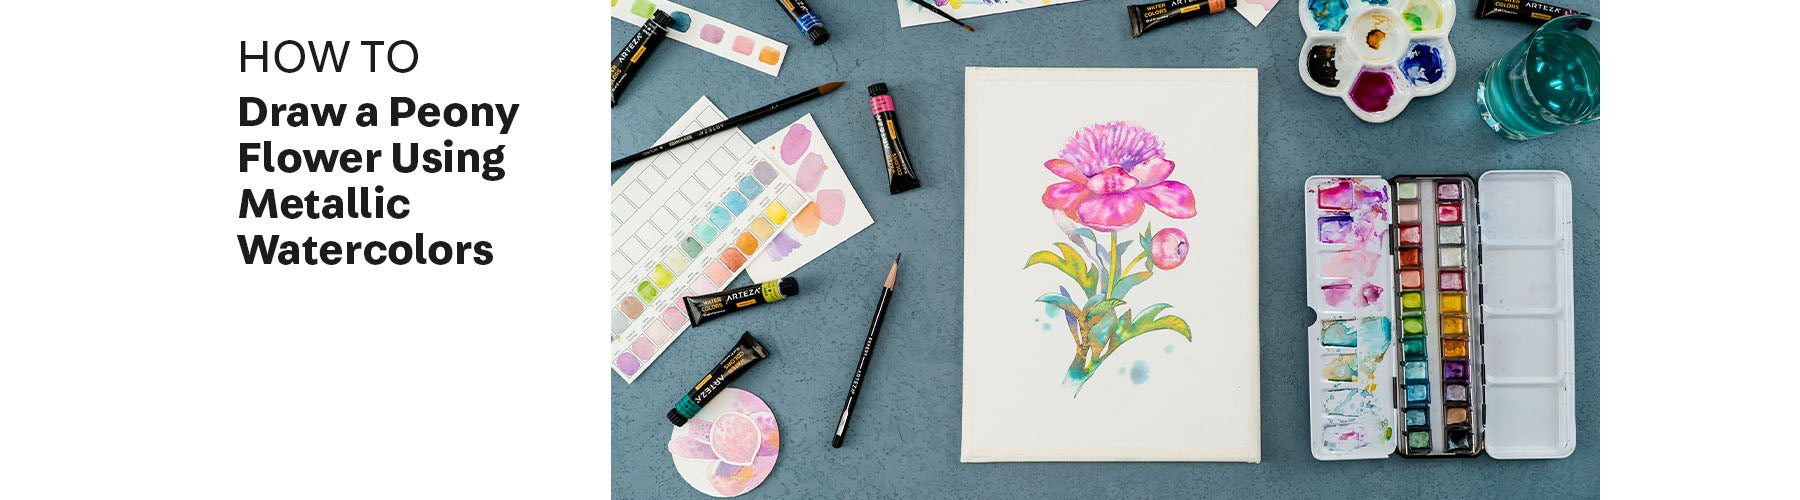 How to Draw a Peony Flower Using Metallic Watercolors